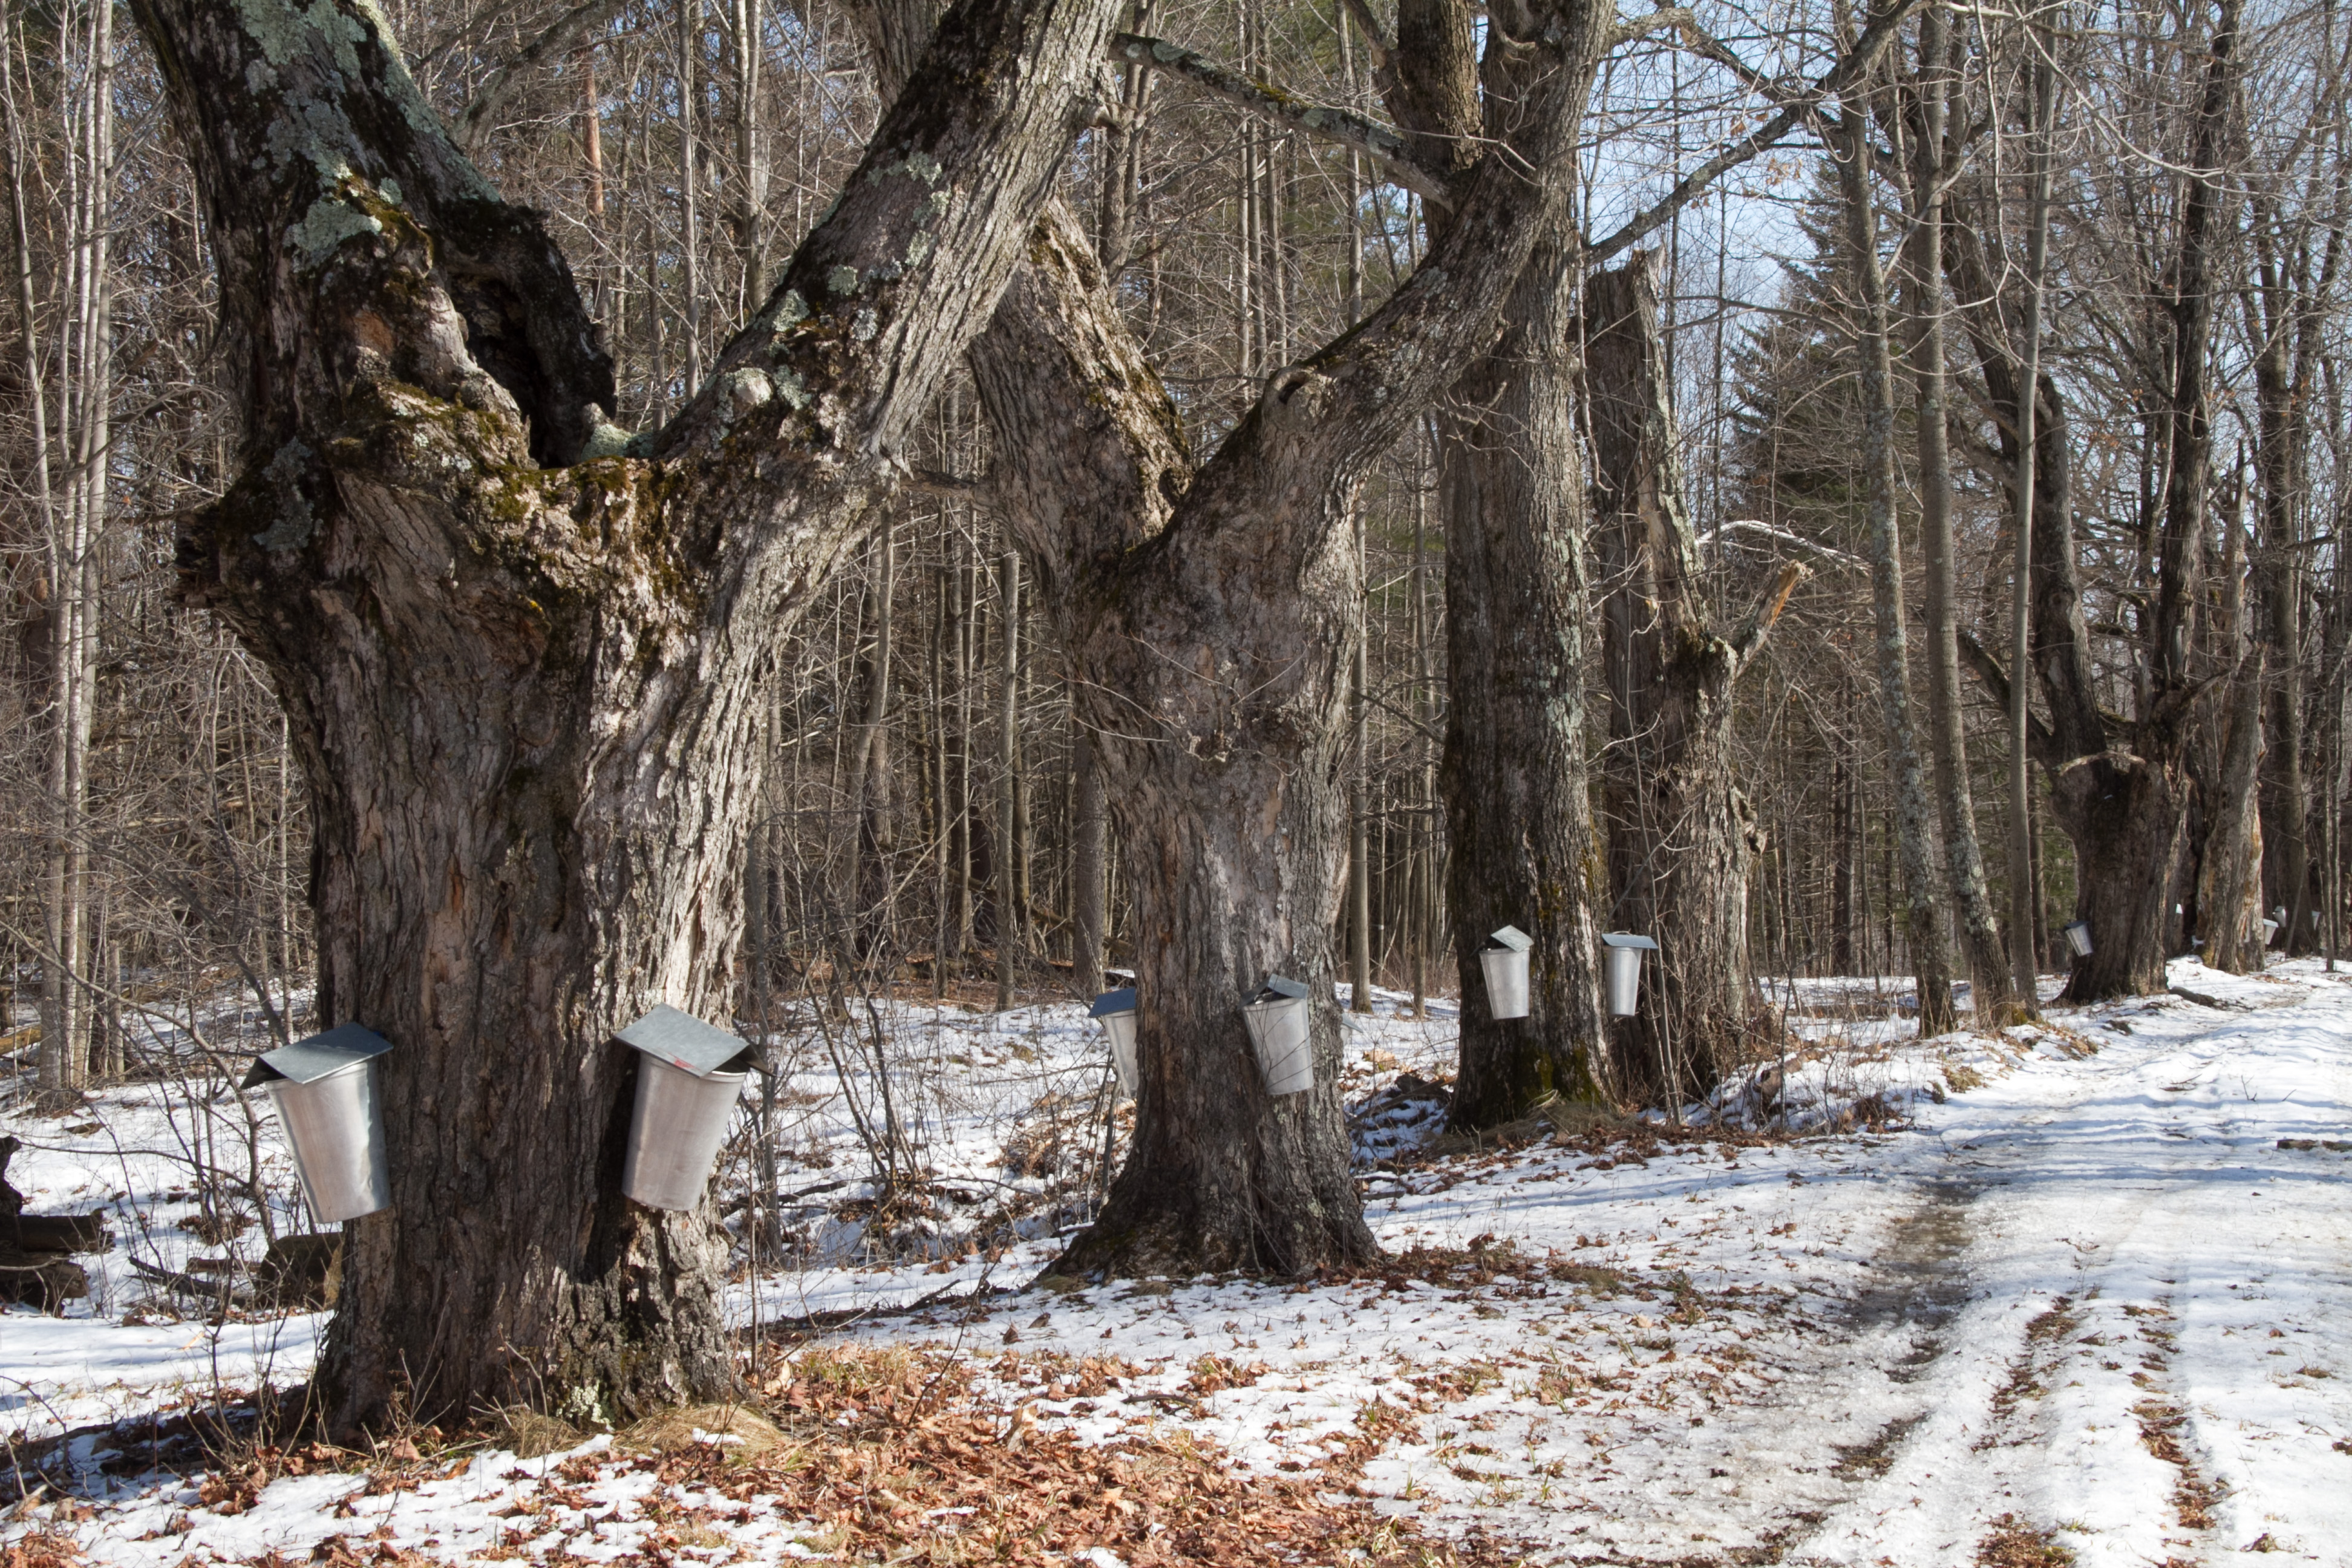 Even very old maple trees produce sap for maple syrup! We don't tap these trees often but we did in 2000 when this photo was taken. 